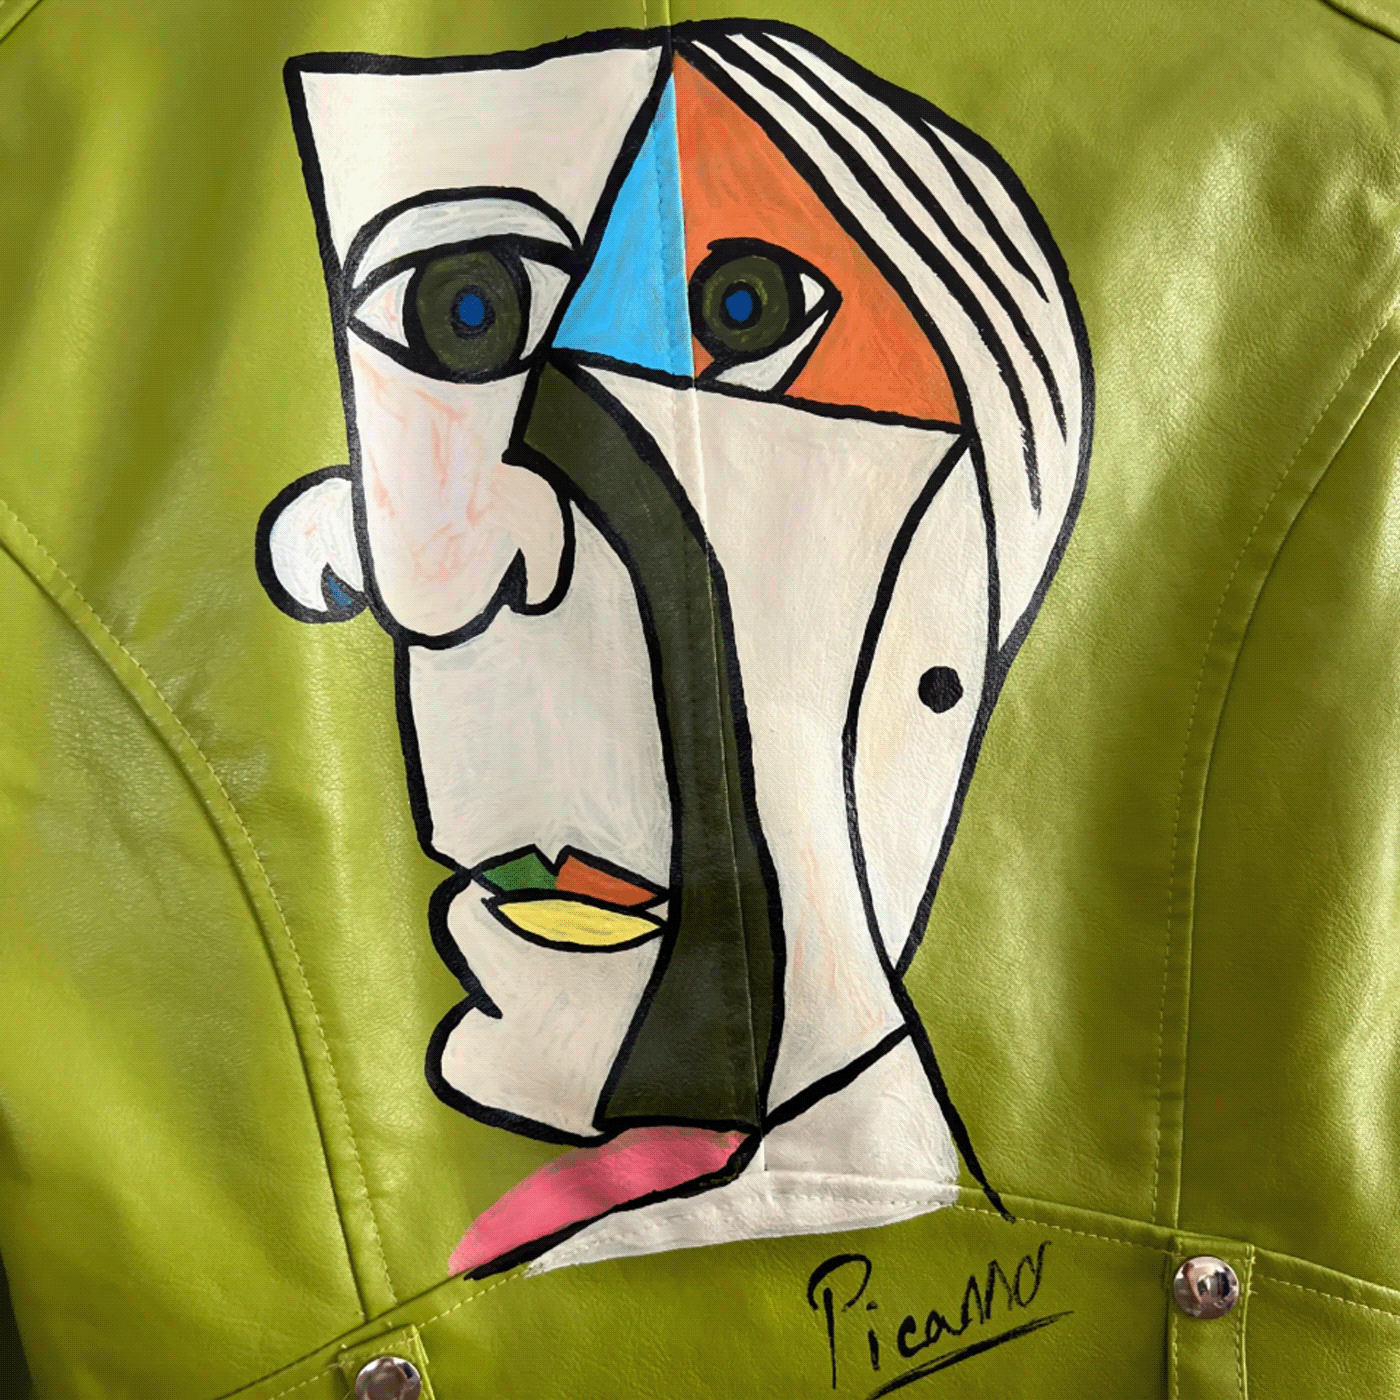 jacket leather Picasso imagination Real Custom phrase quote Unique Paiting